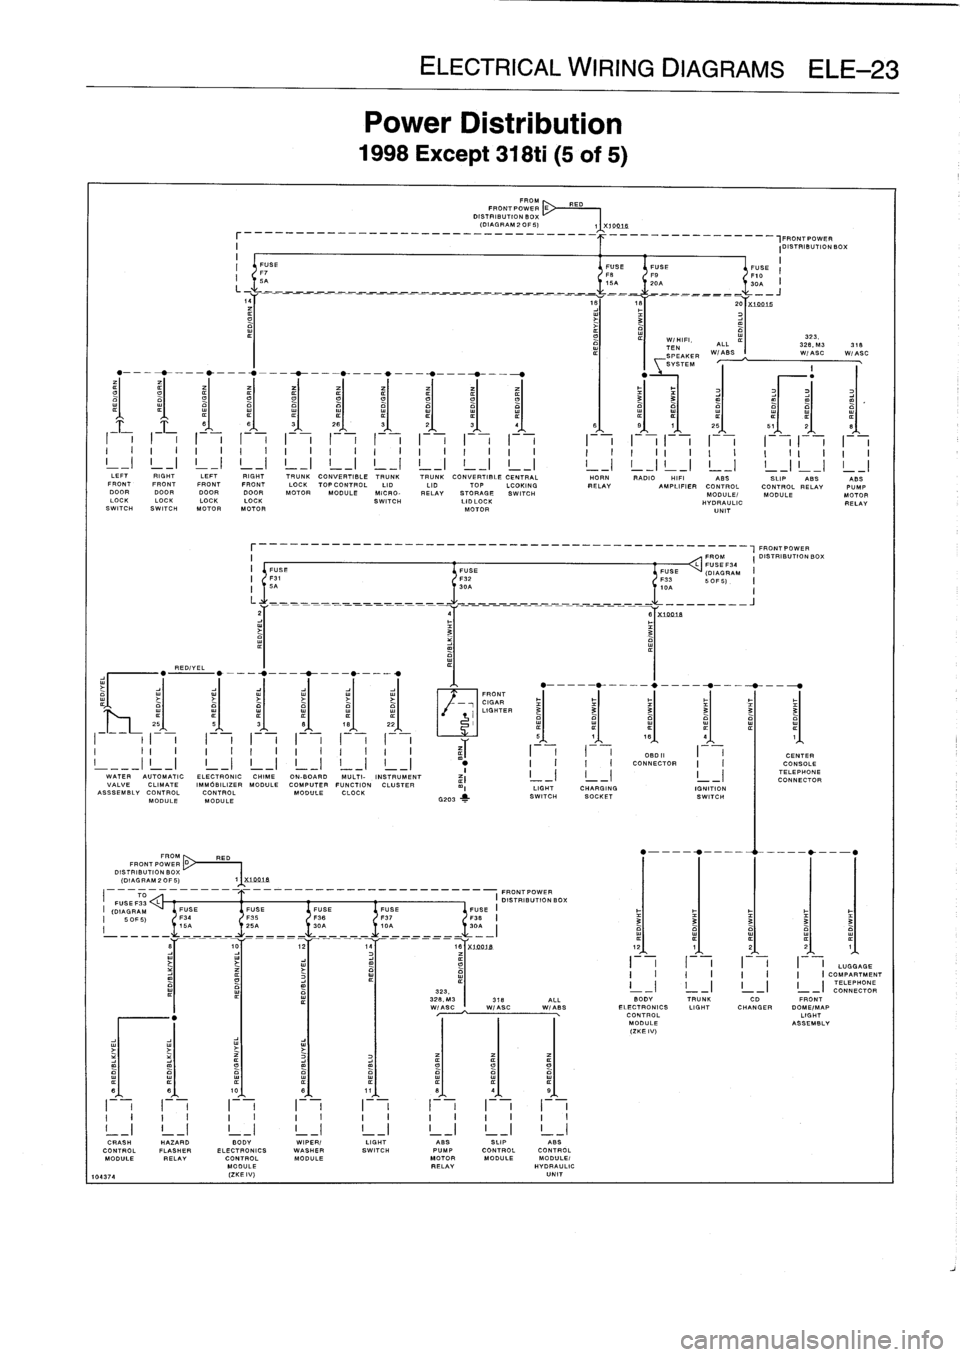 BMW 318i 1995 E36 Workshop Manual 
REDIYEL

FROM
RED
FRONT
PO
WE
R
D~
DISTRIBUTION
BOX
(DIAGRAM
2
OF
5)

_
_
_
_
_
_
_
_
_
_
__
,FRONTPOWER
I

	

IDISTRIBUTIONBOX
I

	

II
FUSE

	

FUSEFUSE

	

FUSE
F7

	

FS

	

FO

	

F10
I
I
5A

	
